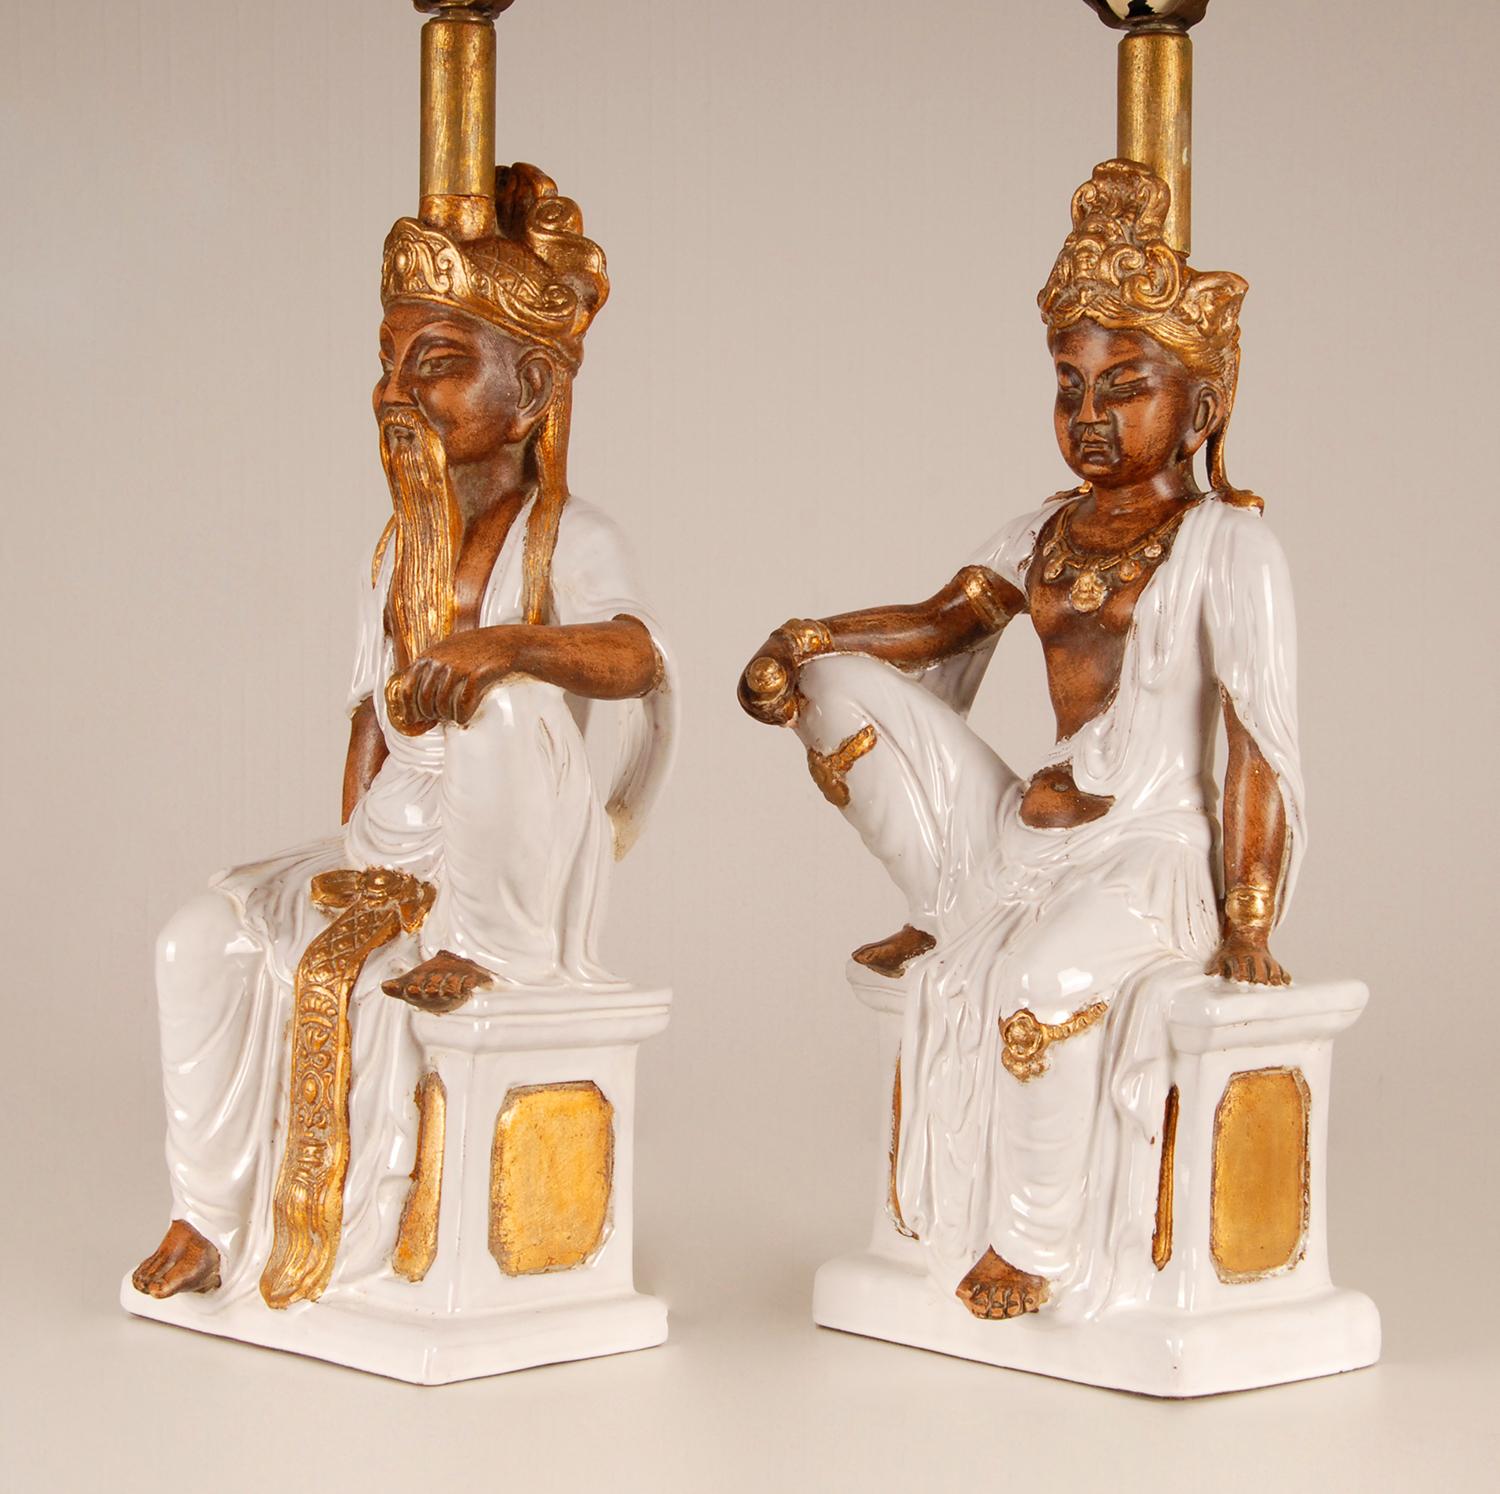 Glazed Vintage Ceramic Table Lamps Italian Chinoiserie Chinese Buddha figures Ceramic For Sale